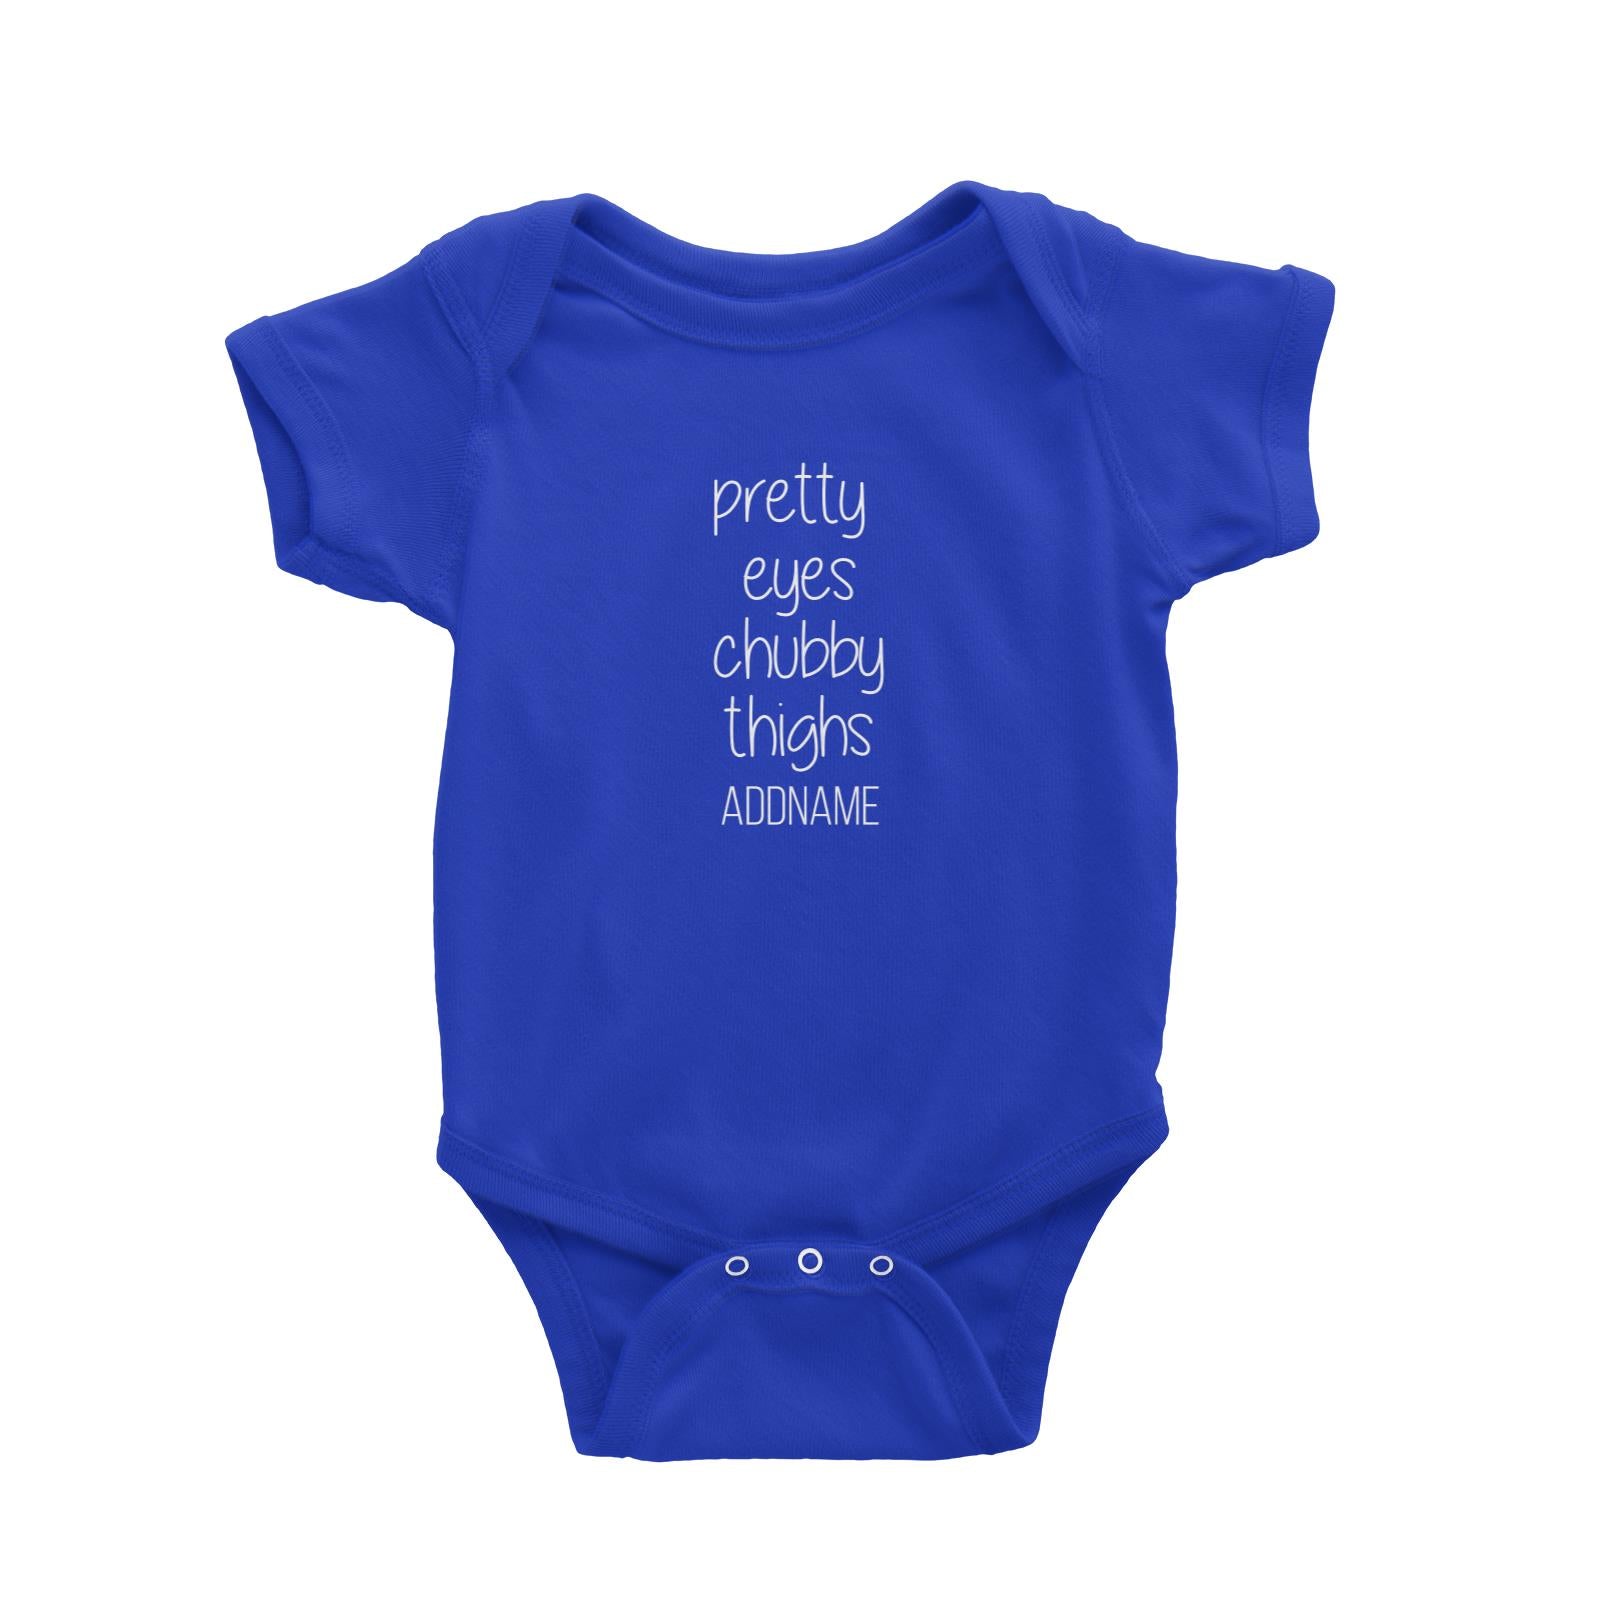 Pretty Eyes Chubby Thighs Addname Baby Romper